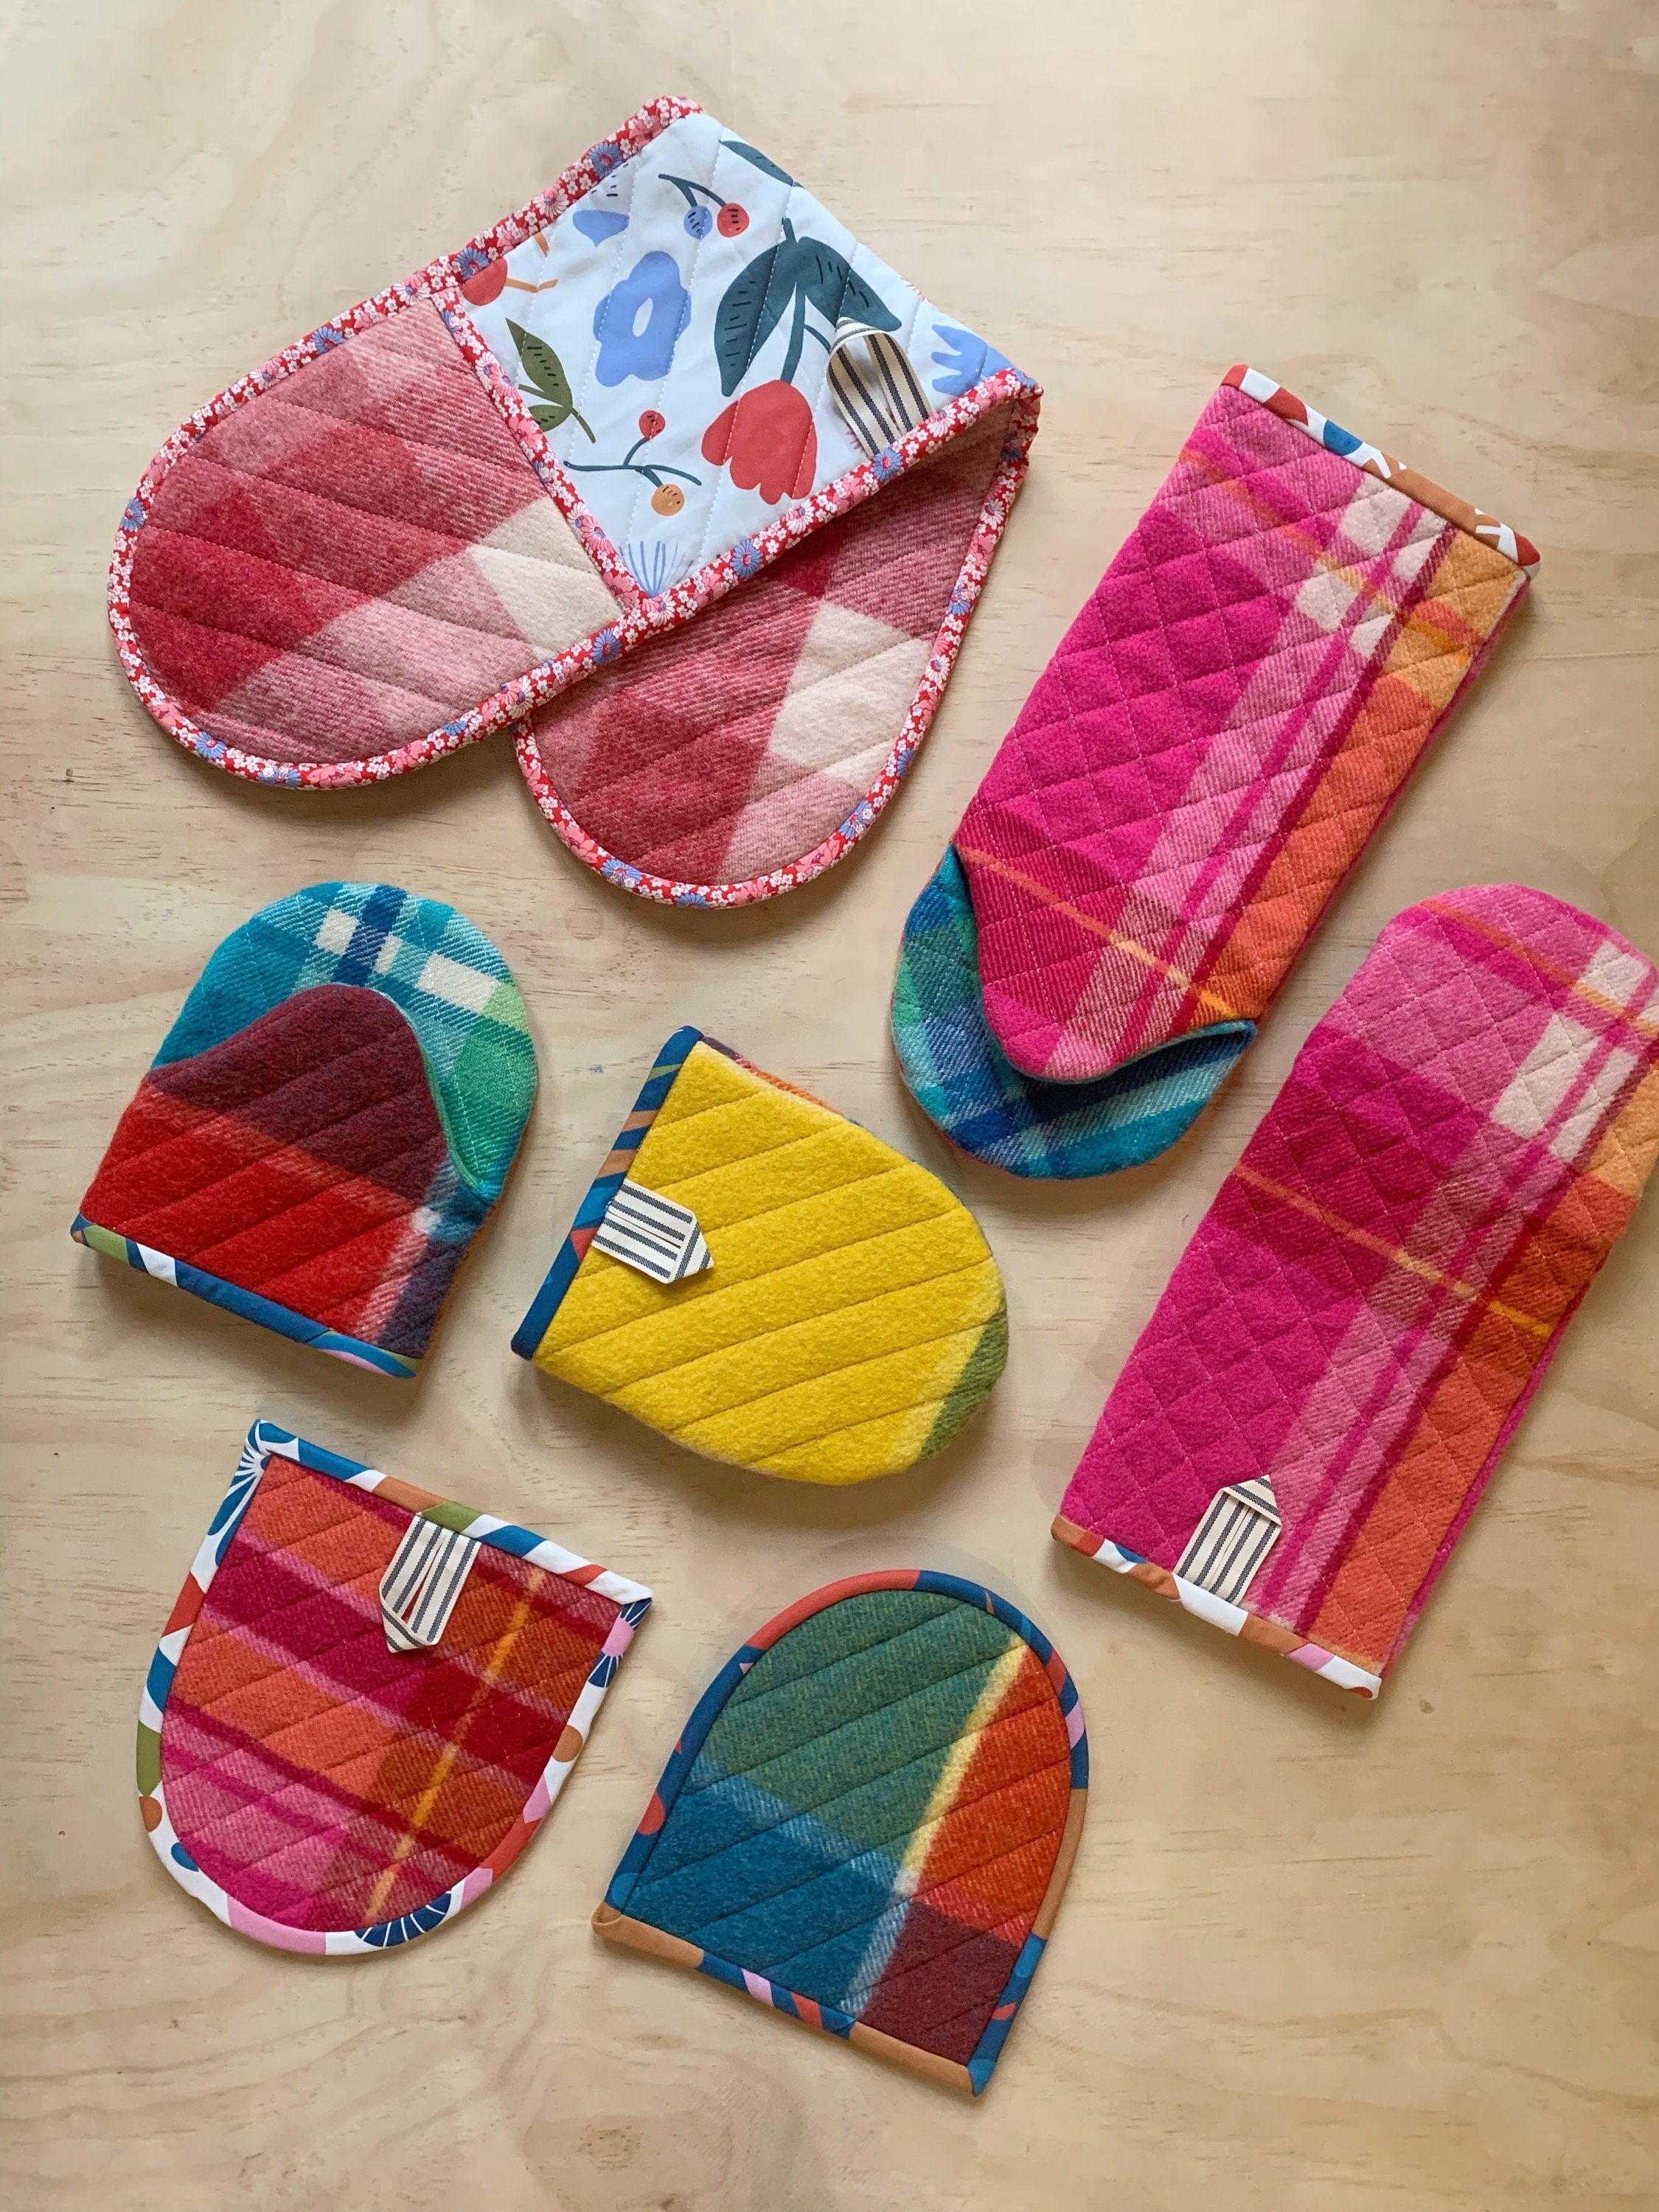 How to Make a Quilted Double Oven Mitt - STACEY LEE CREATIVE